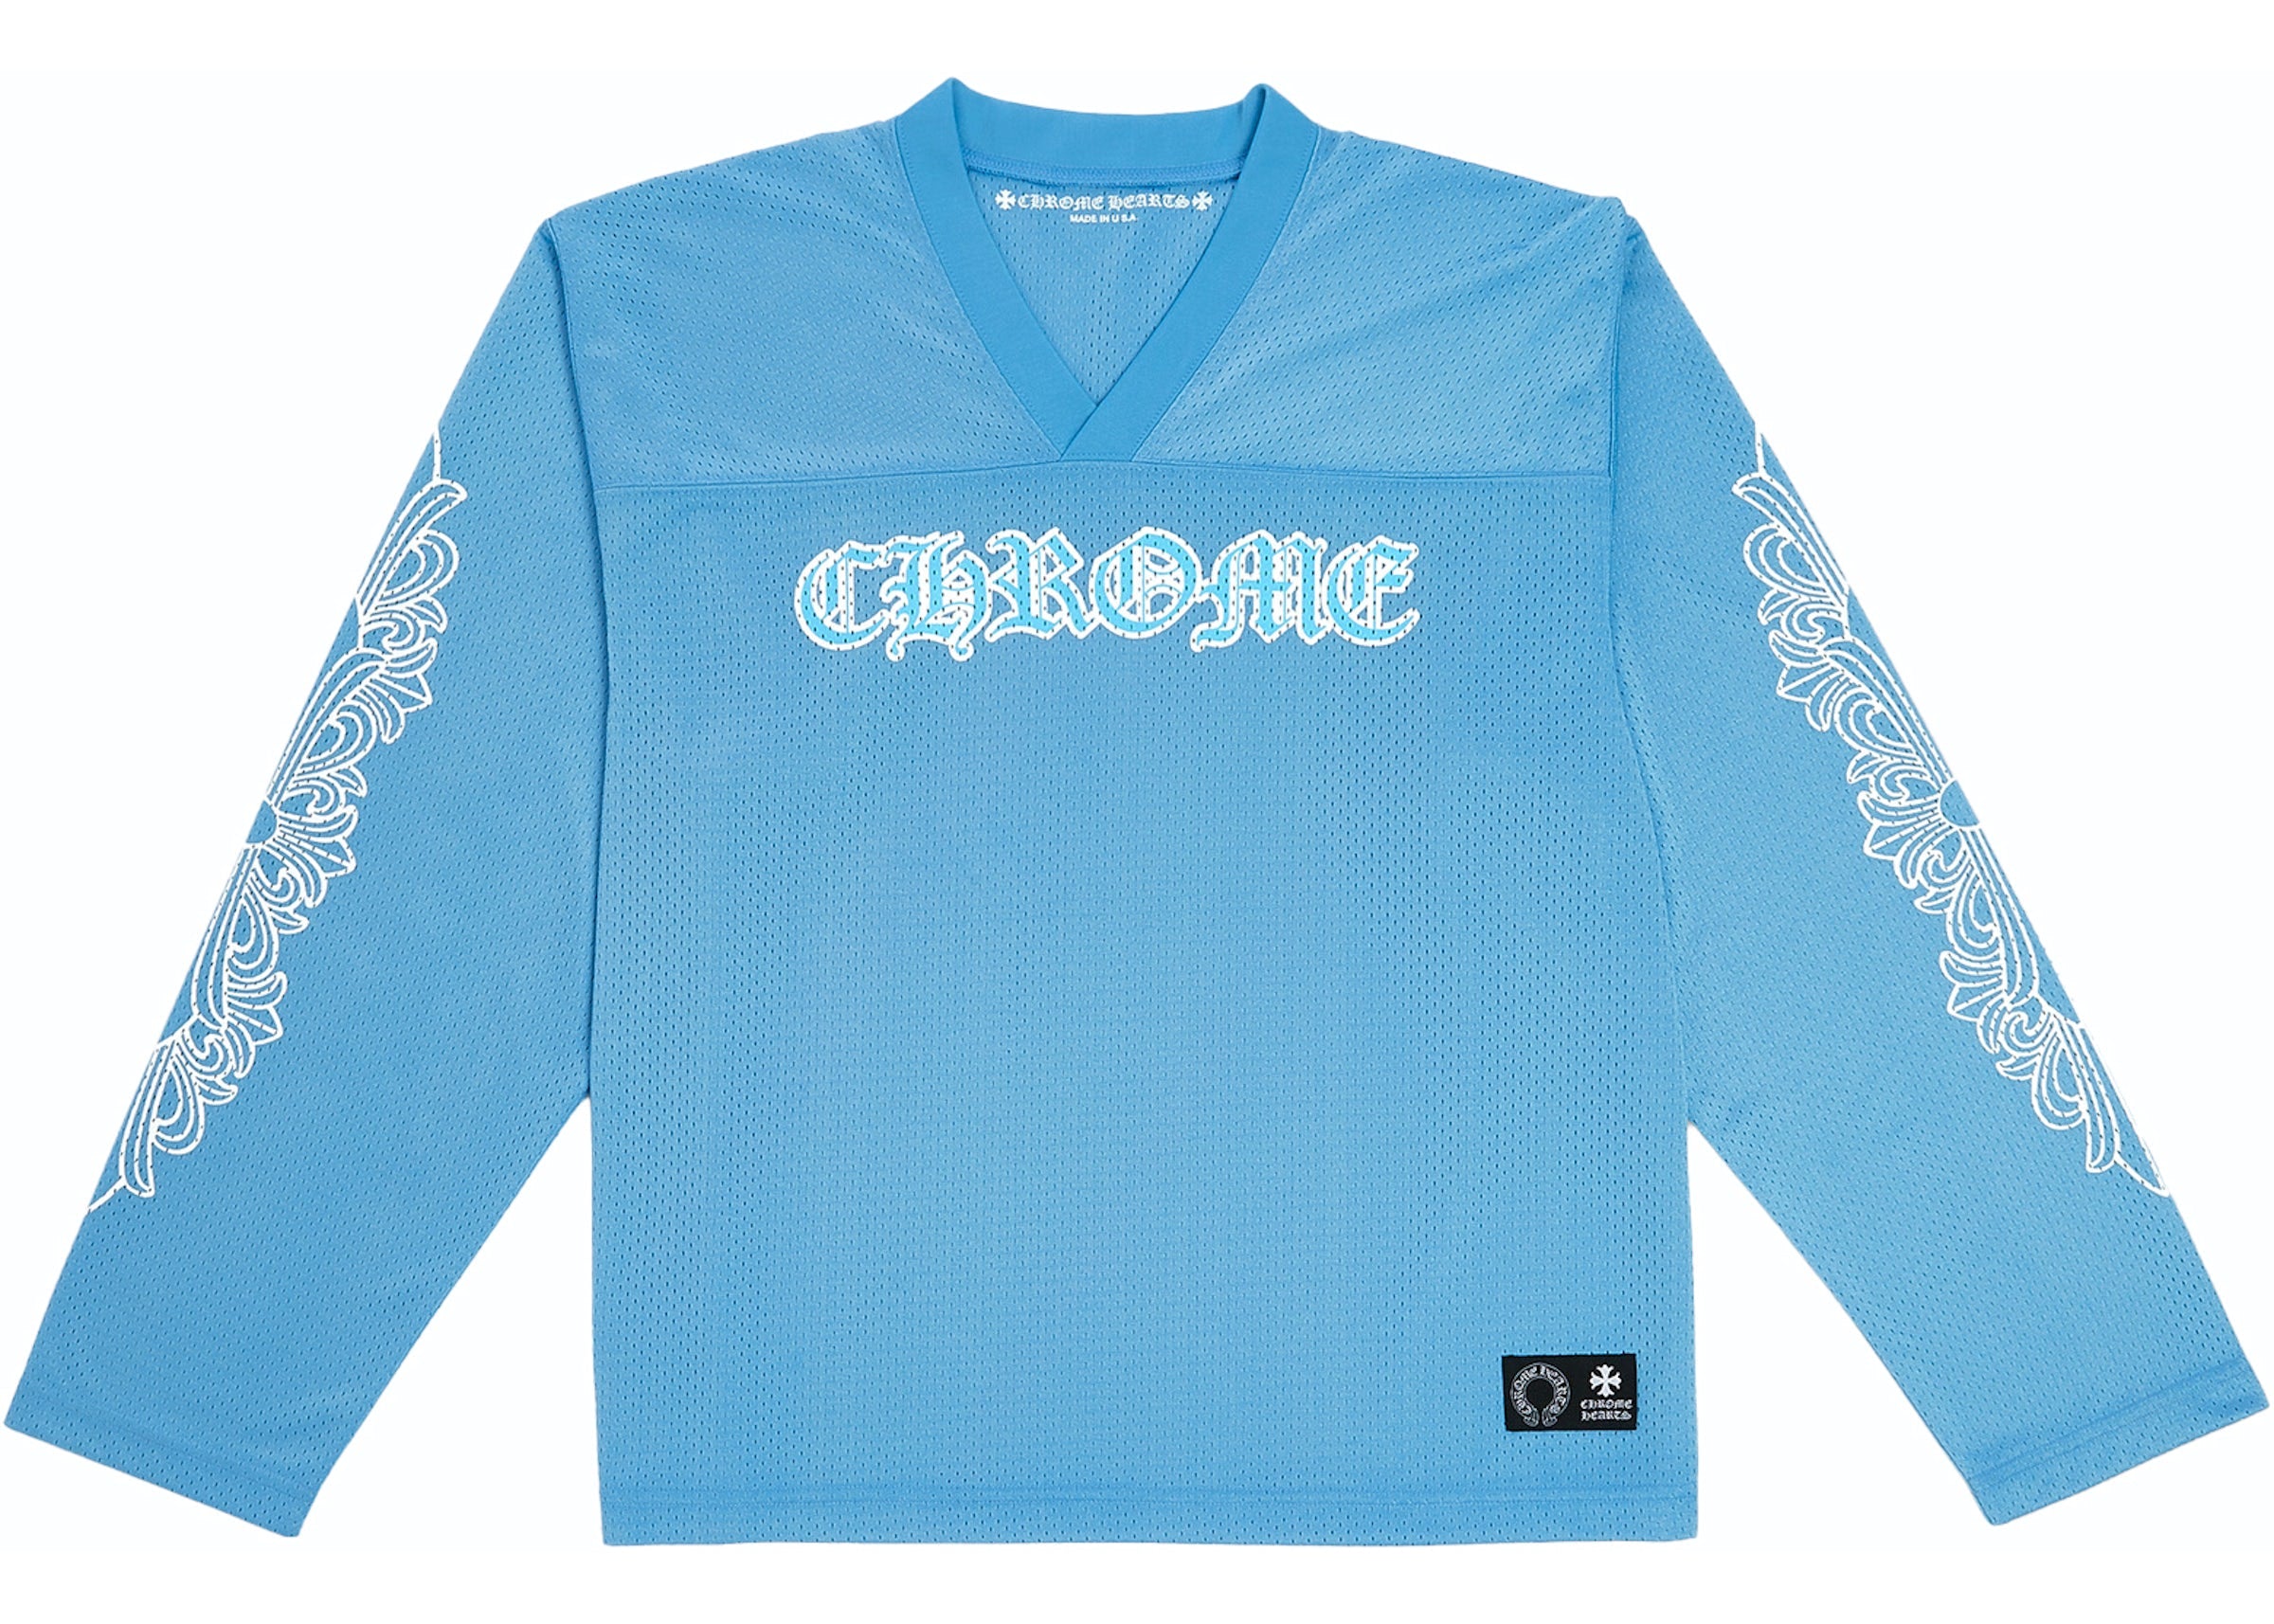 Chrome Hearts L/S Mesh Warm Up Jersey